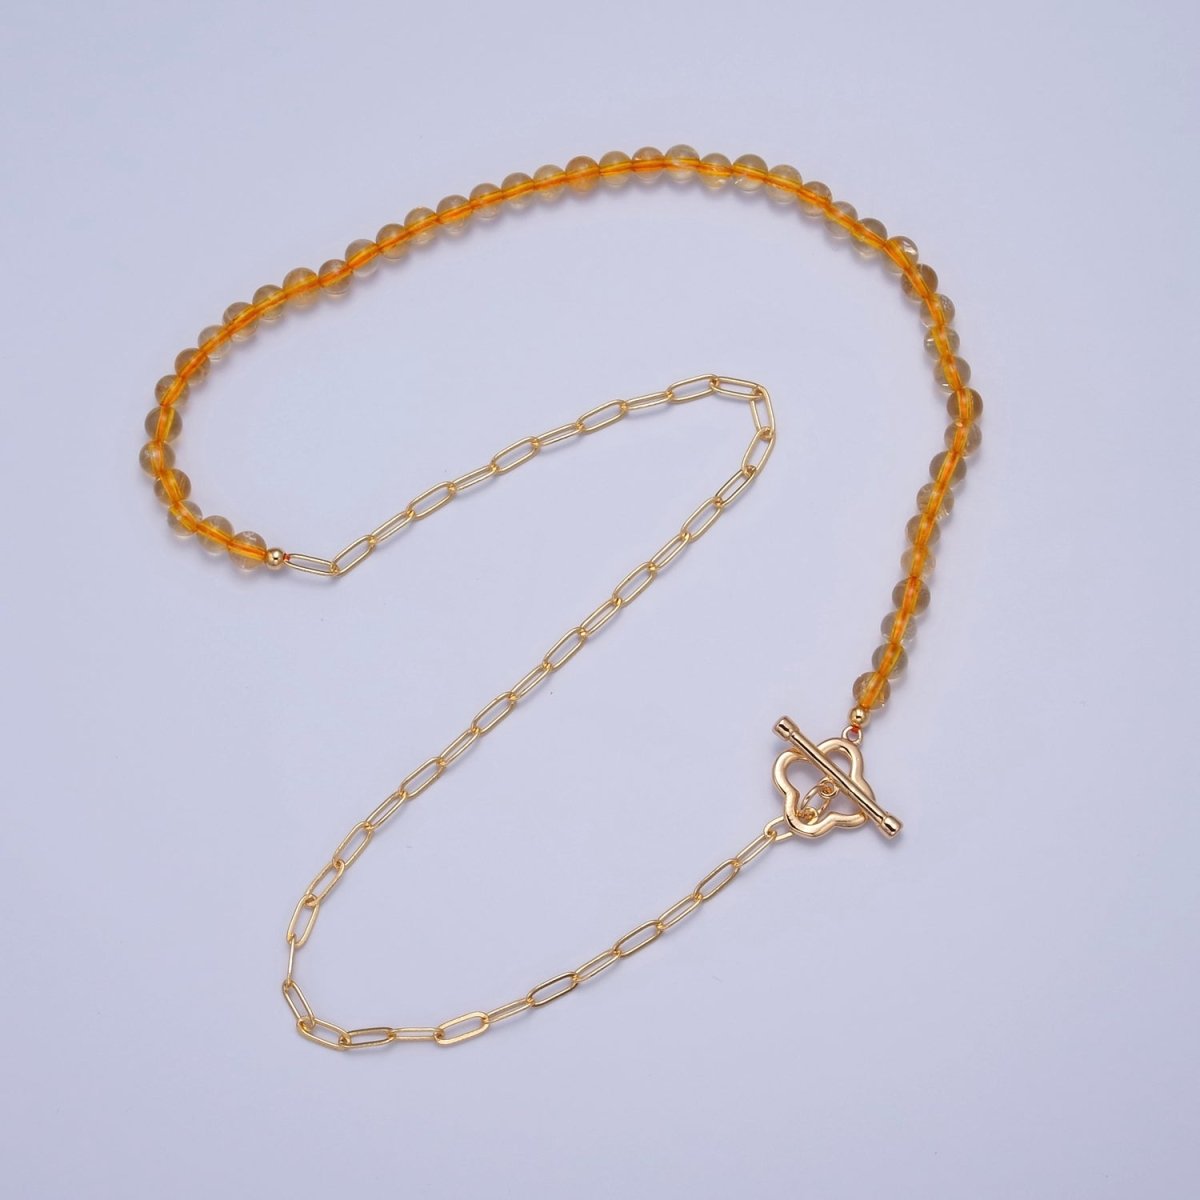 Dainty Half Bead Half Link Chain Necklace, 24k Gold Filled Paperclip Chain with Yellow Quartz Necklace | WA-962 Clearance Pricing - DLUXCA